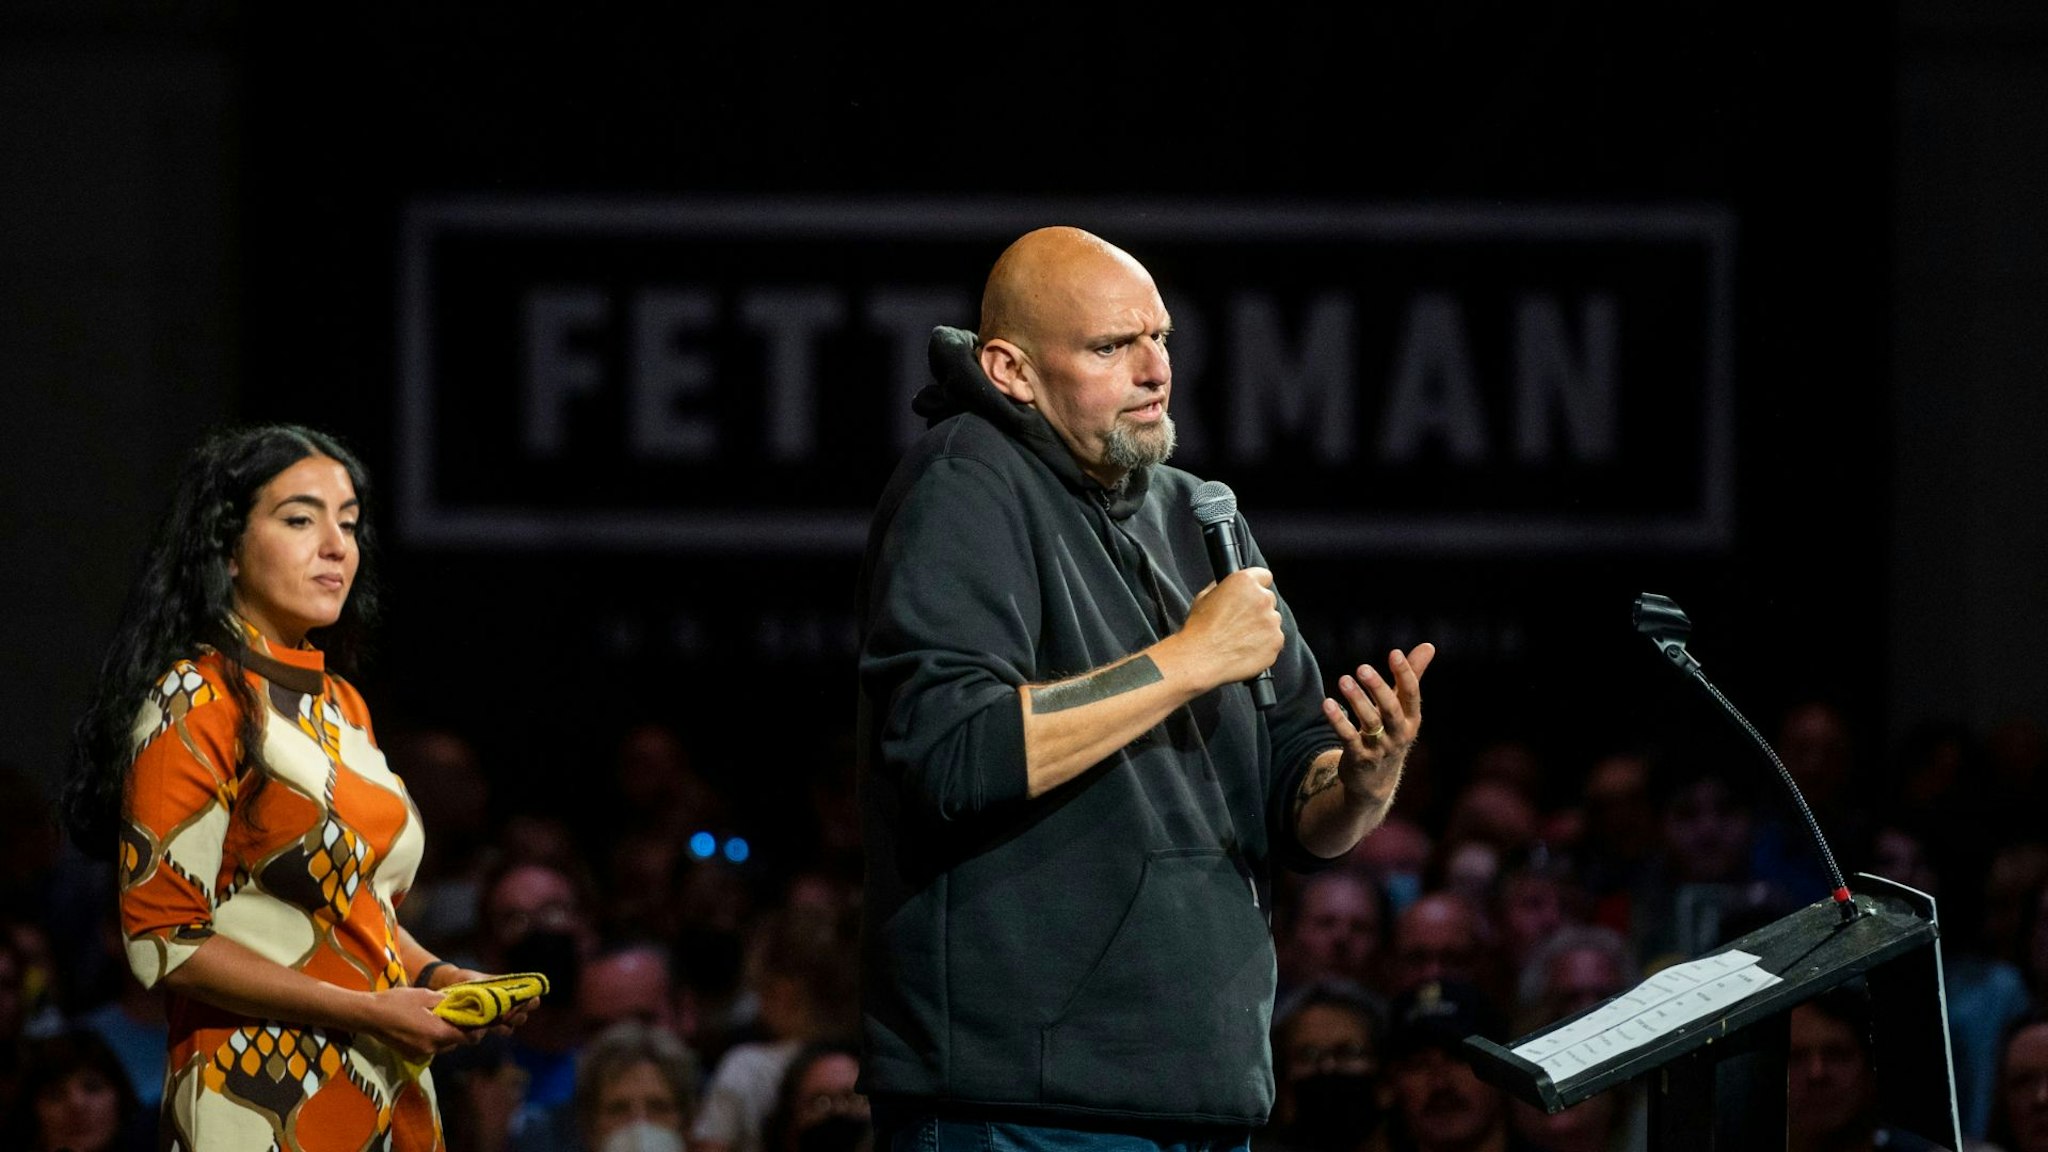 ERIE, PA - AUGUST 12: Democratic Senate candidate Lt. Gov. John Fetterman (D-PA) speaks during a rally as his wife Gisele Barreto Fetterman looks on at the Bayfront Convention Center on August 12, 2022 in Erie, Pennsylvania. Fetterman made his return to the campaign trail in Erie after recovering from a stroke he suffered in May.